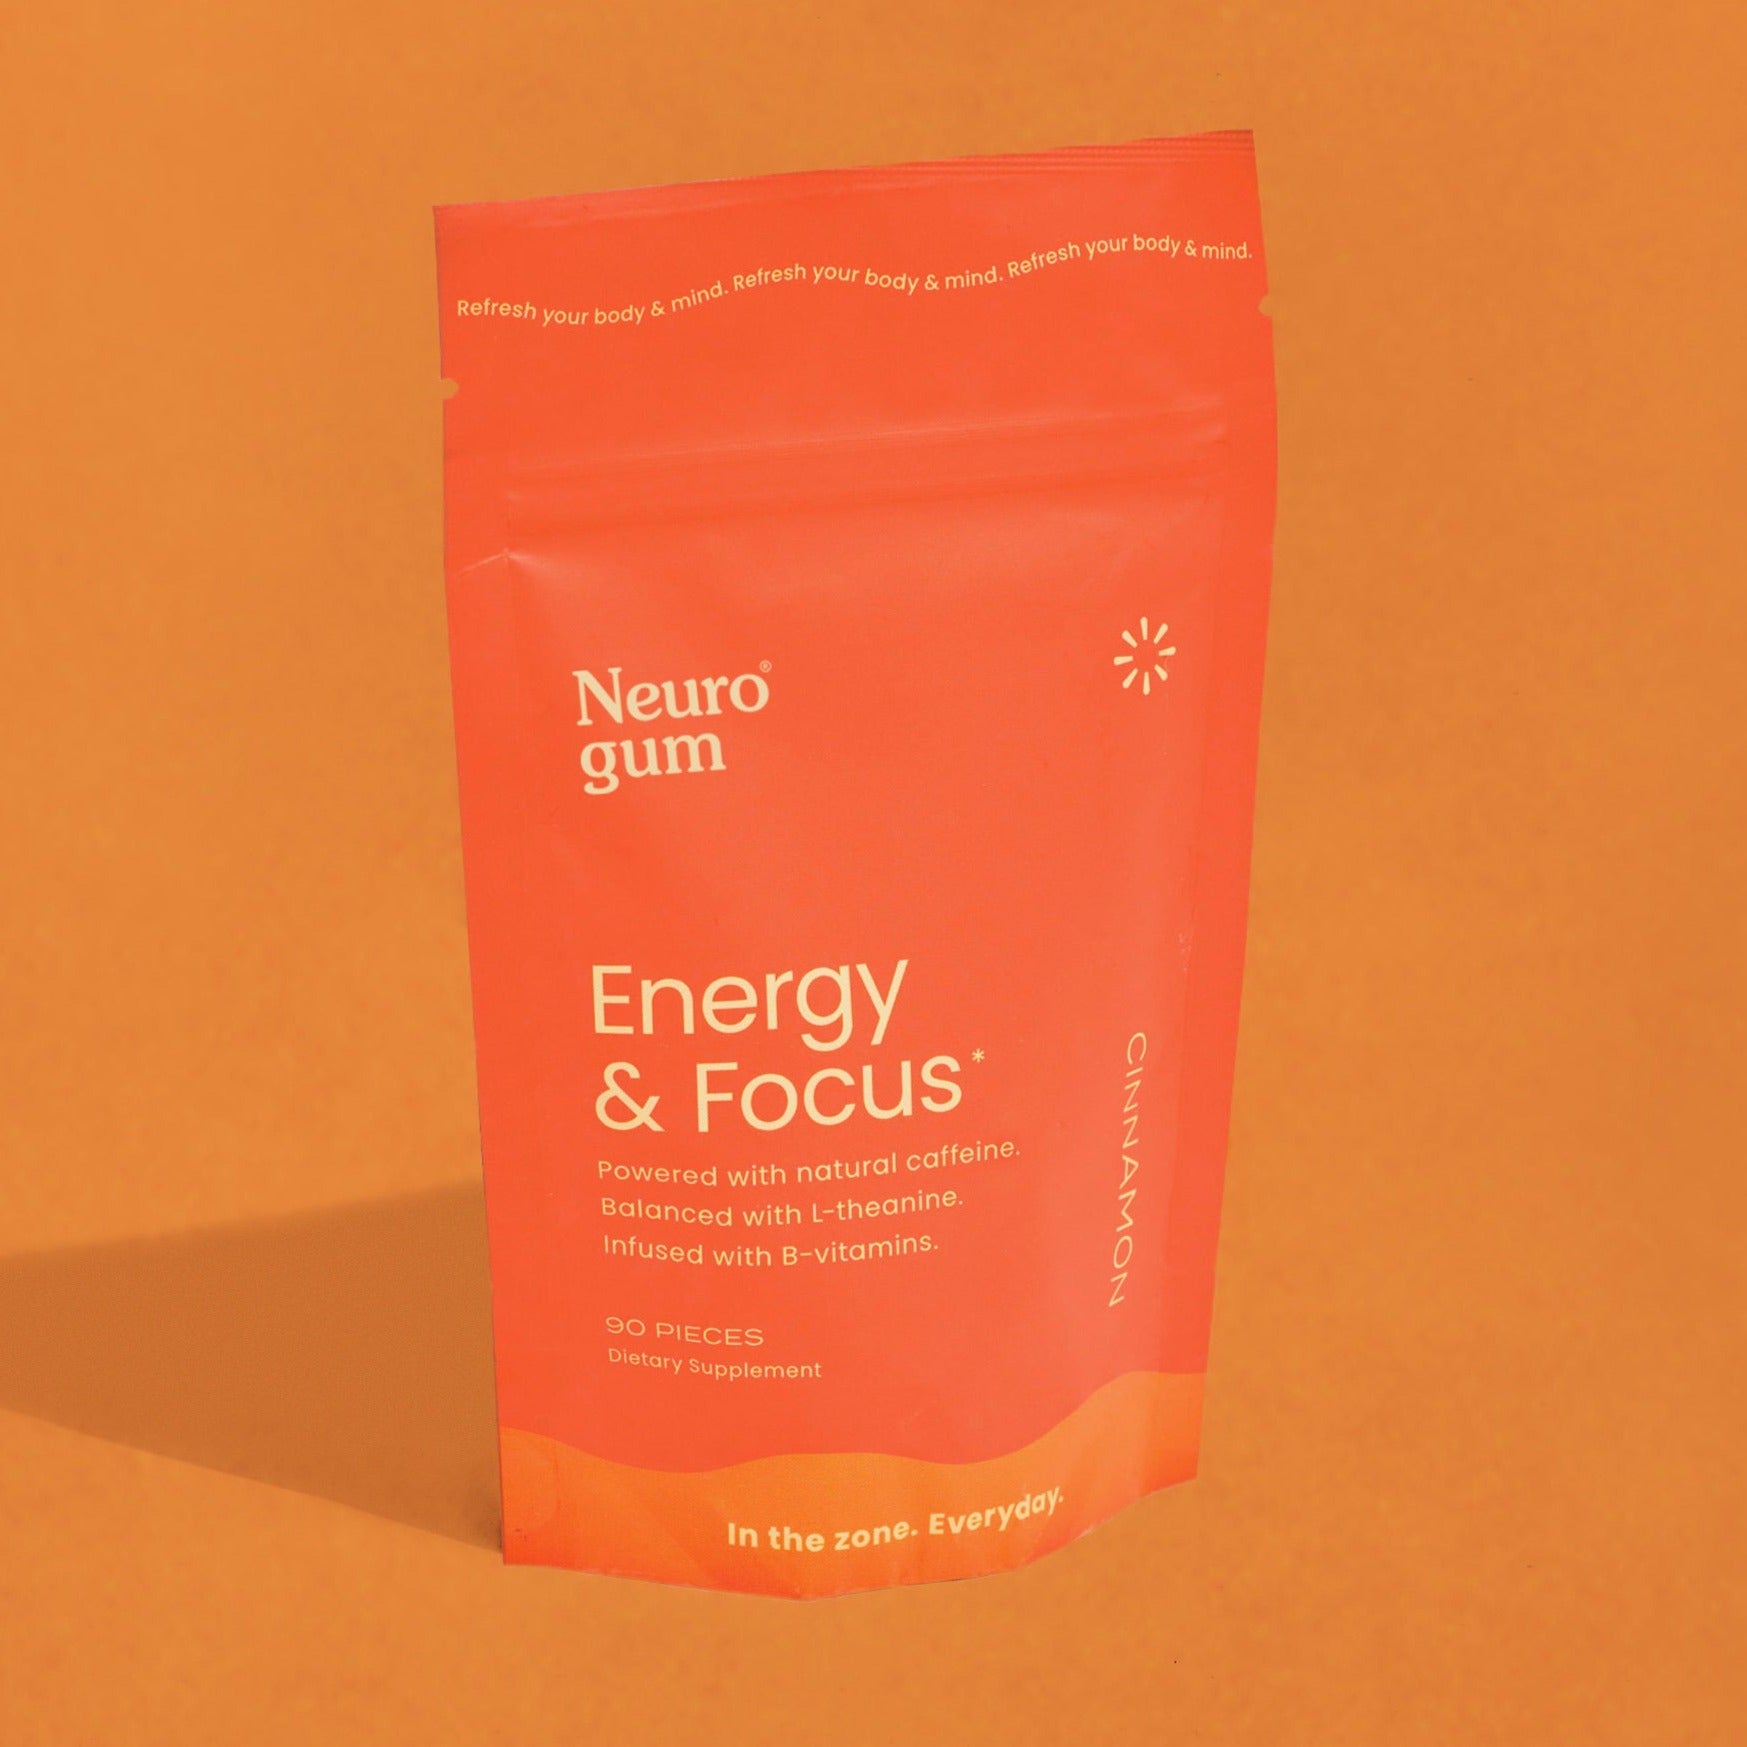 Energy and Focus Gum by Neuro